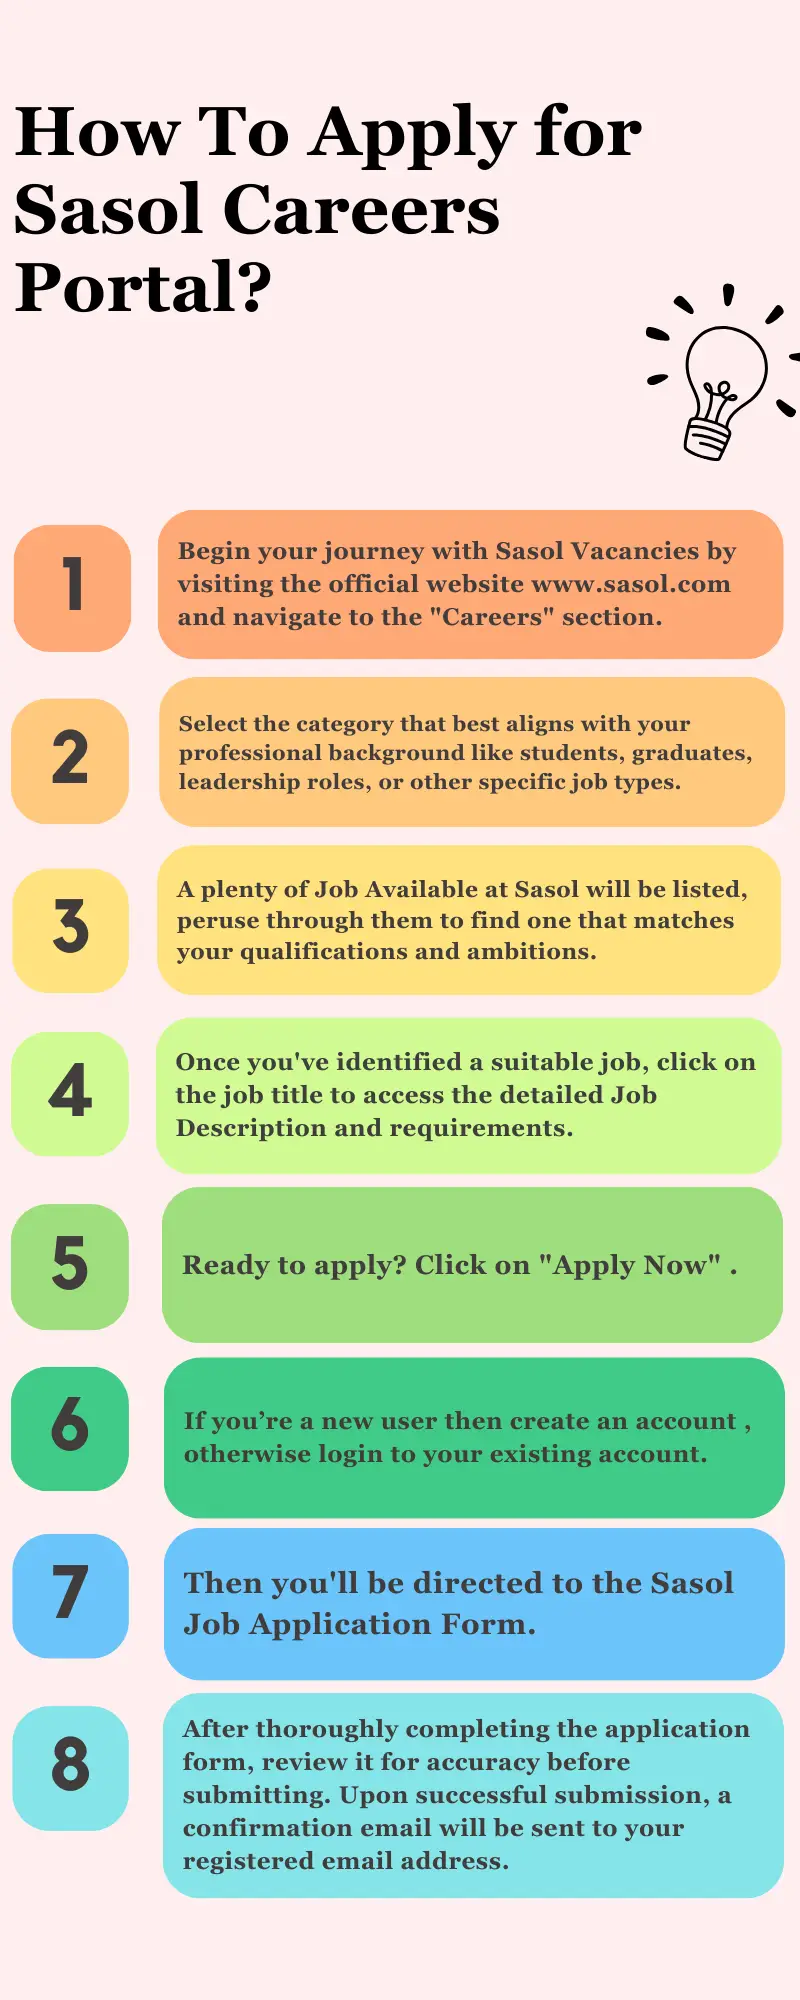 How To Apply for Sasol Careers Portal?